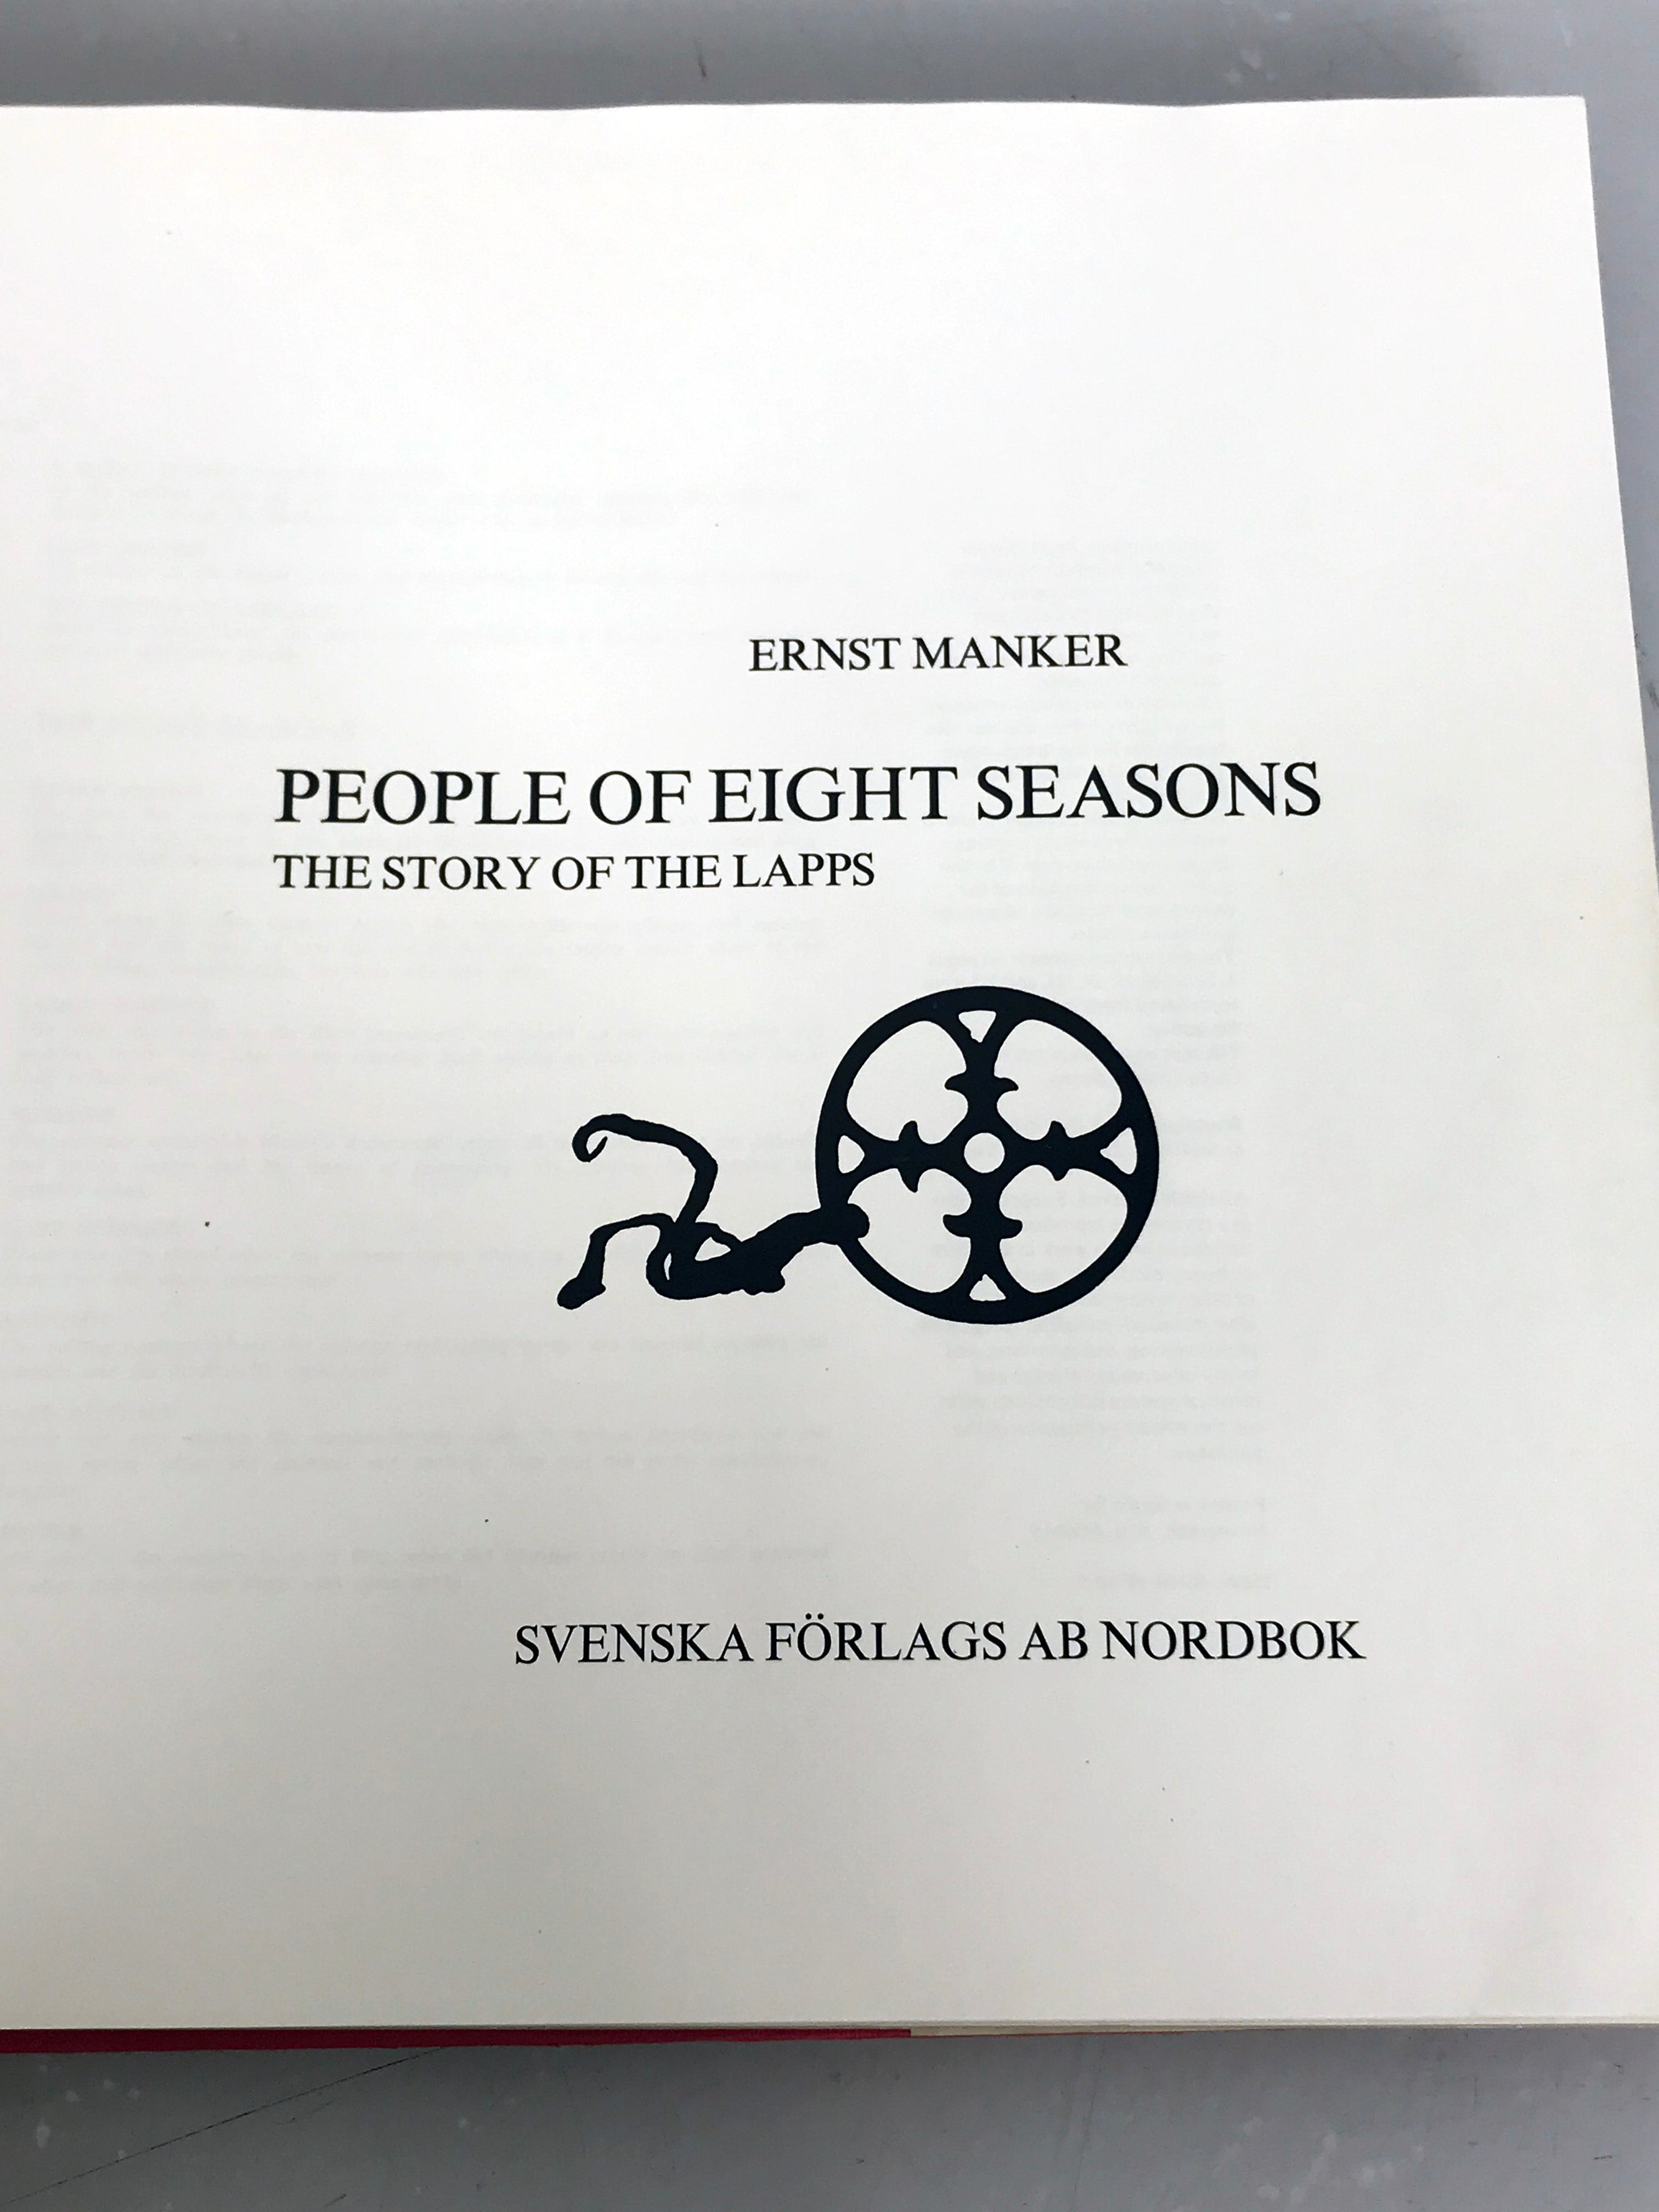 People of Eight Seasons The Story of the Lapps by Ernst Manker 1975 HC DJ